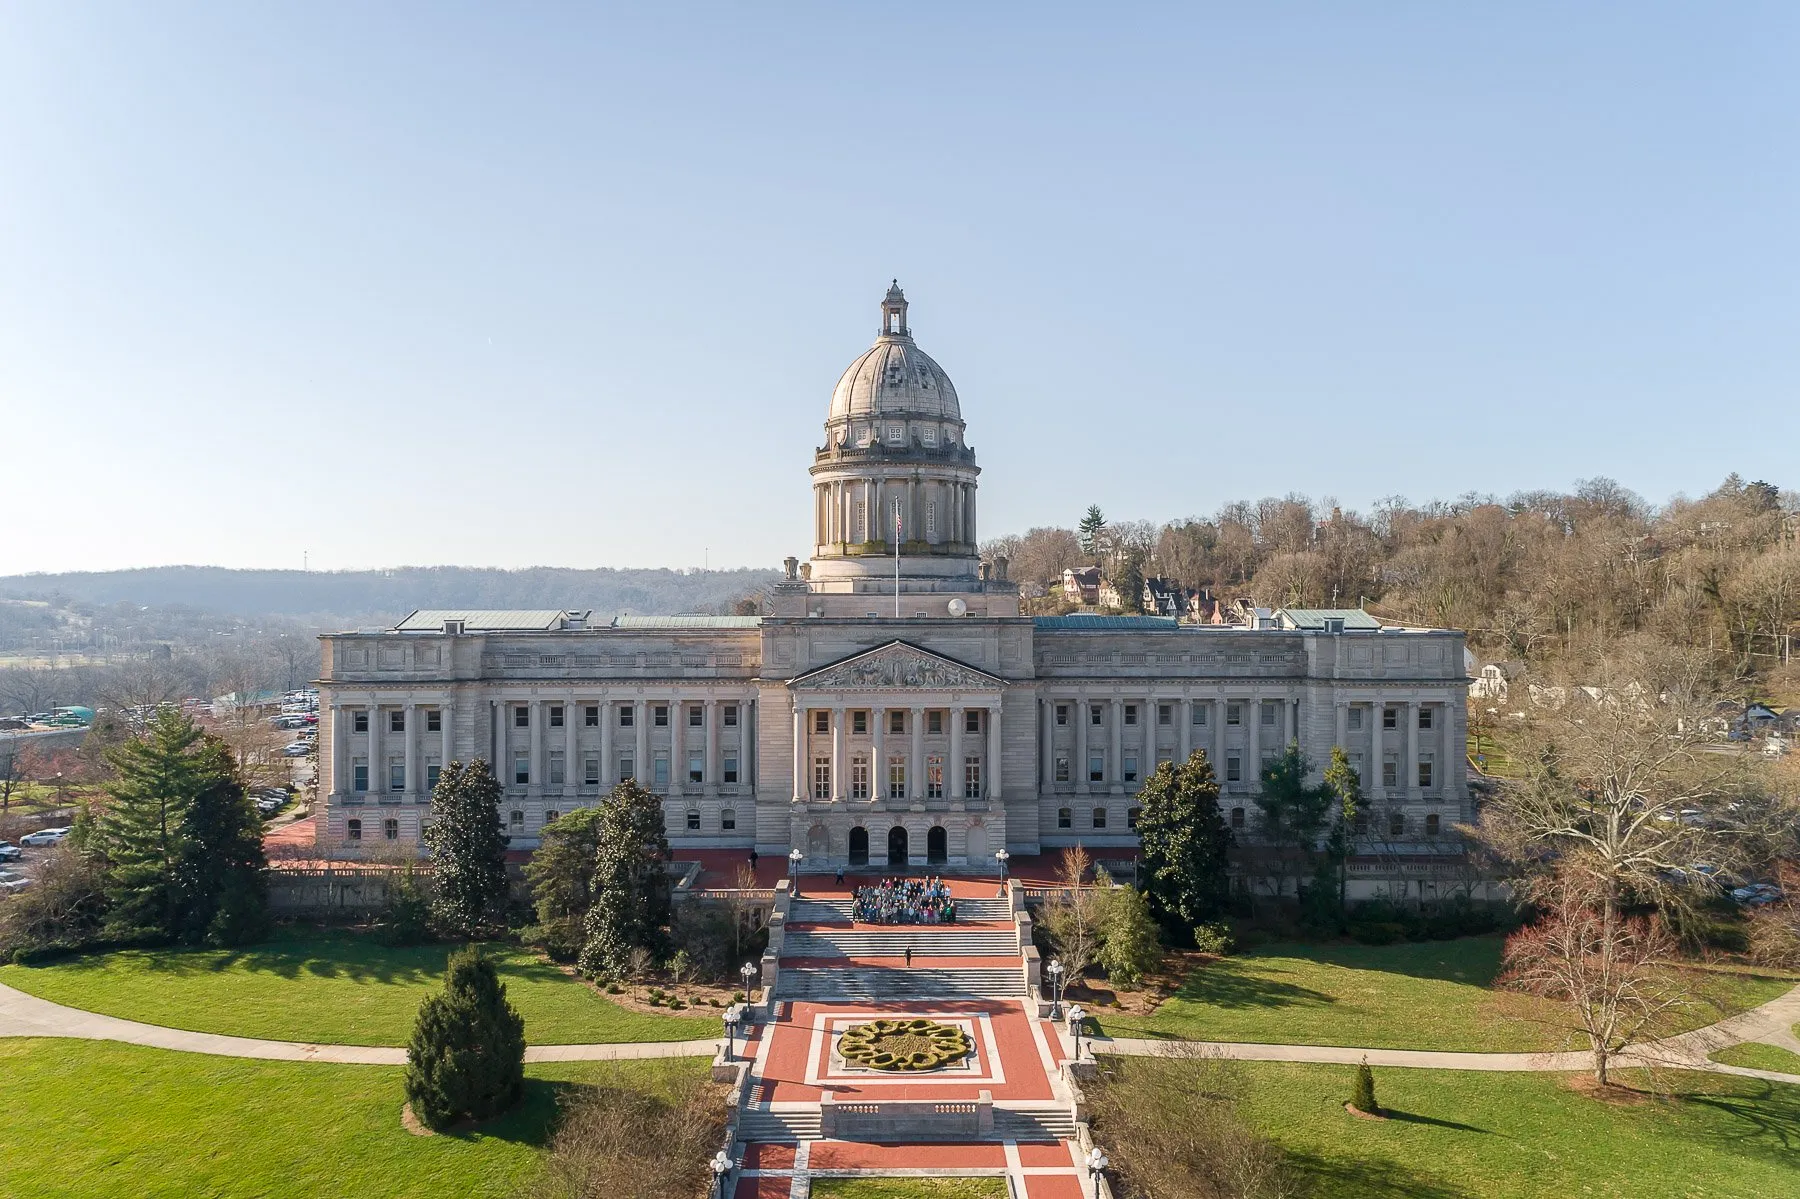 Key Kentucky Departments Are at Risk Due to Continued Spending on Restricted Chinese Tech